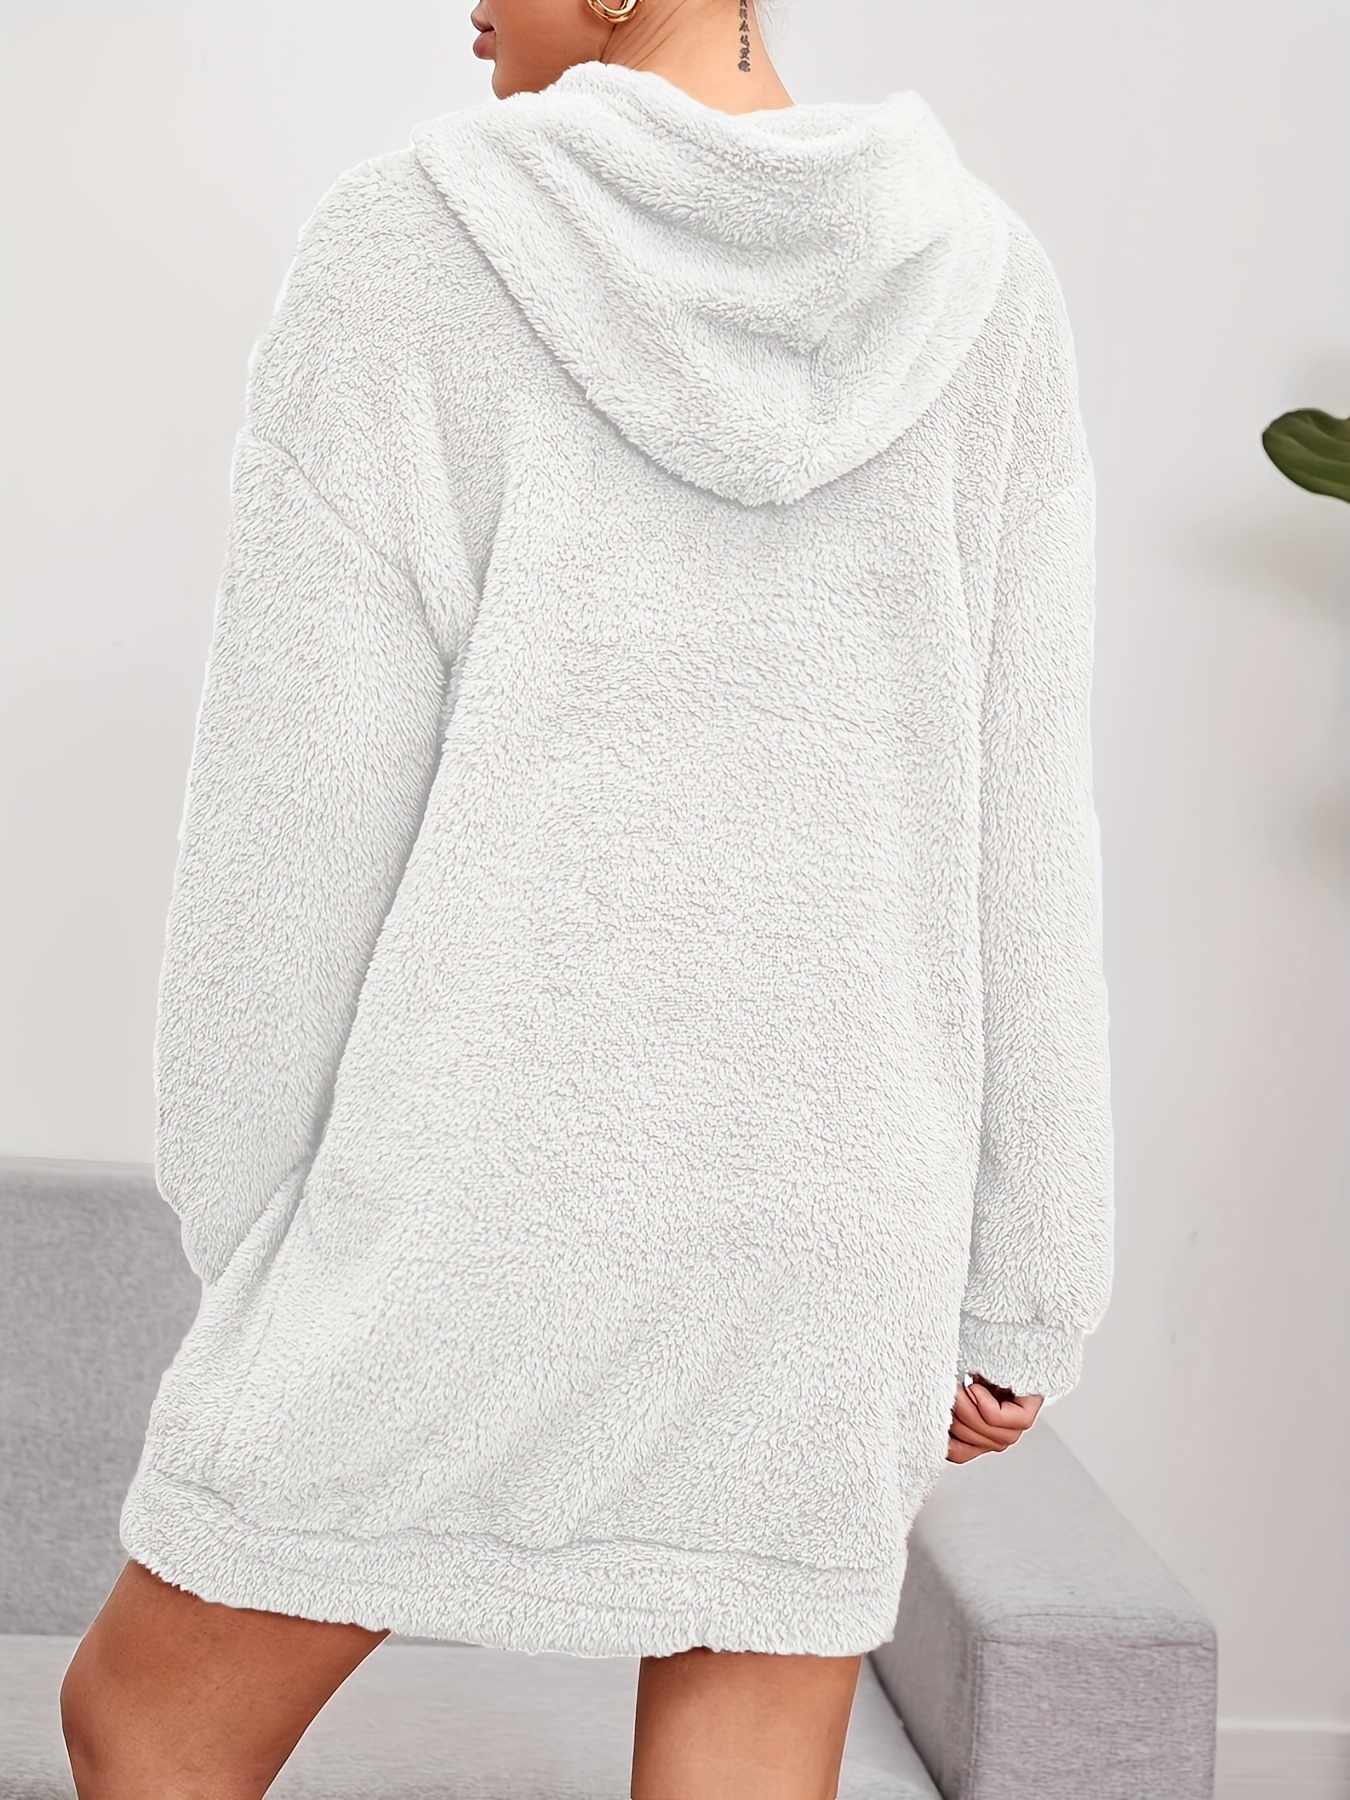 hooded teddy dress casual solid long sleeve warm dress womens clothing details 21